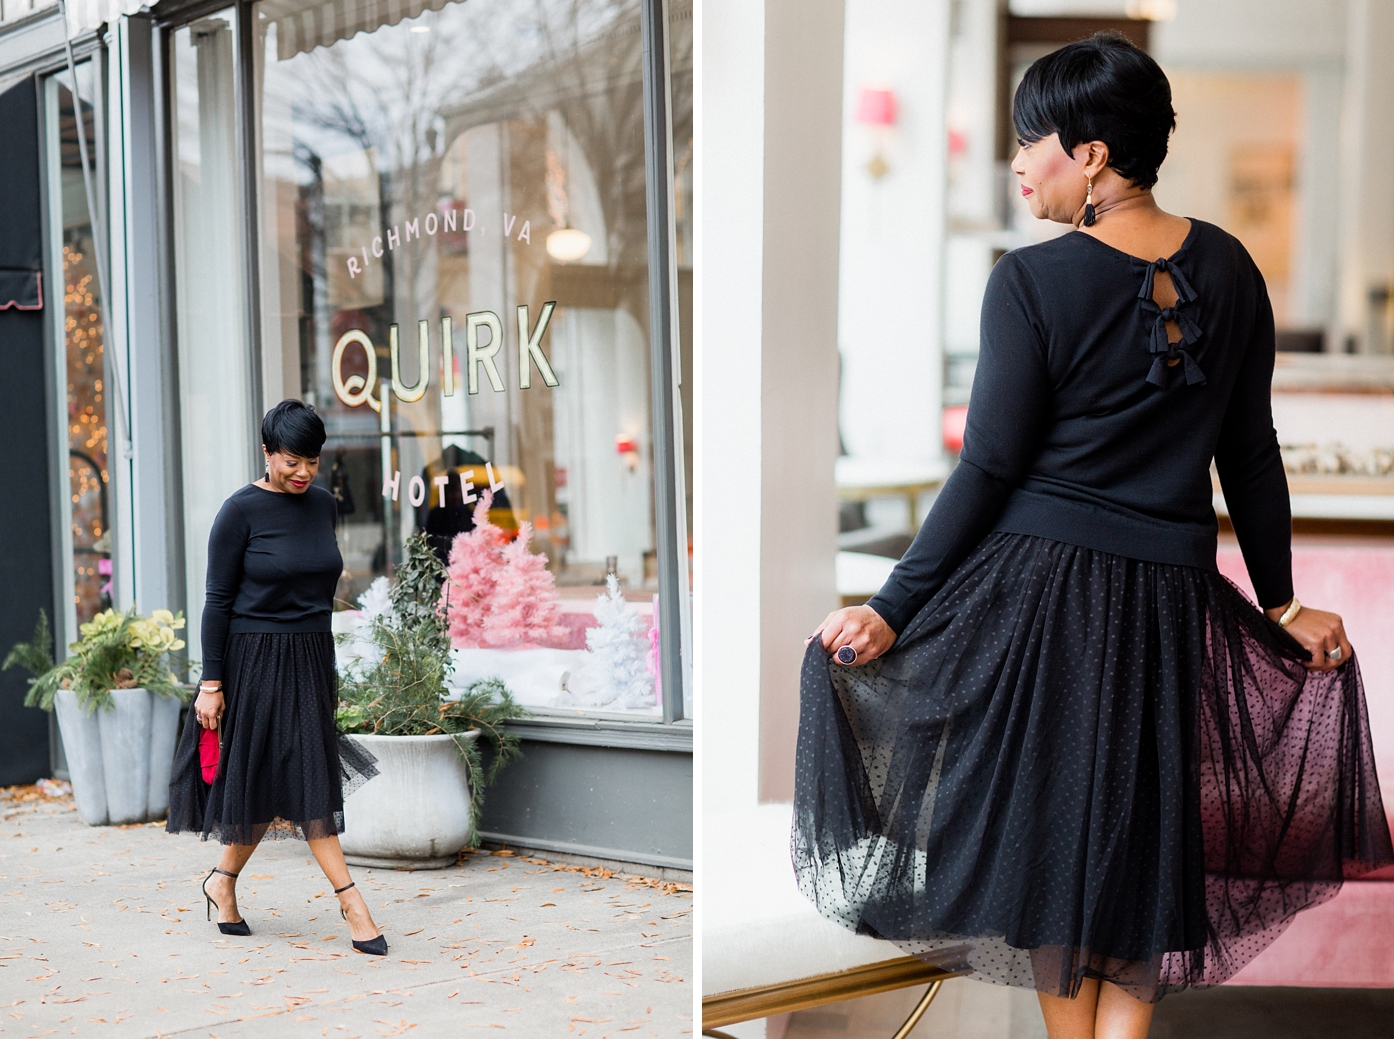 Black Tulle Skirt at Quirk Hotel | Richmond Fashion Blogger MedleyStyle by Alisandra Photography